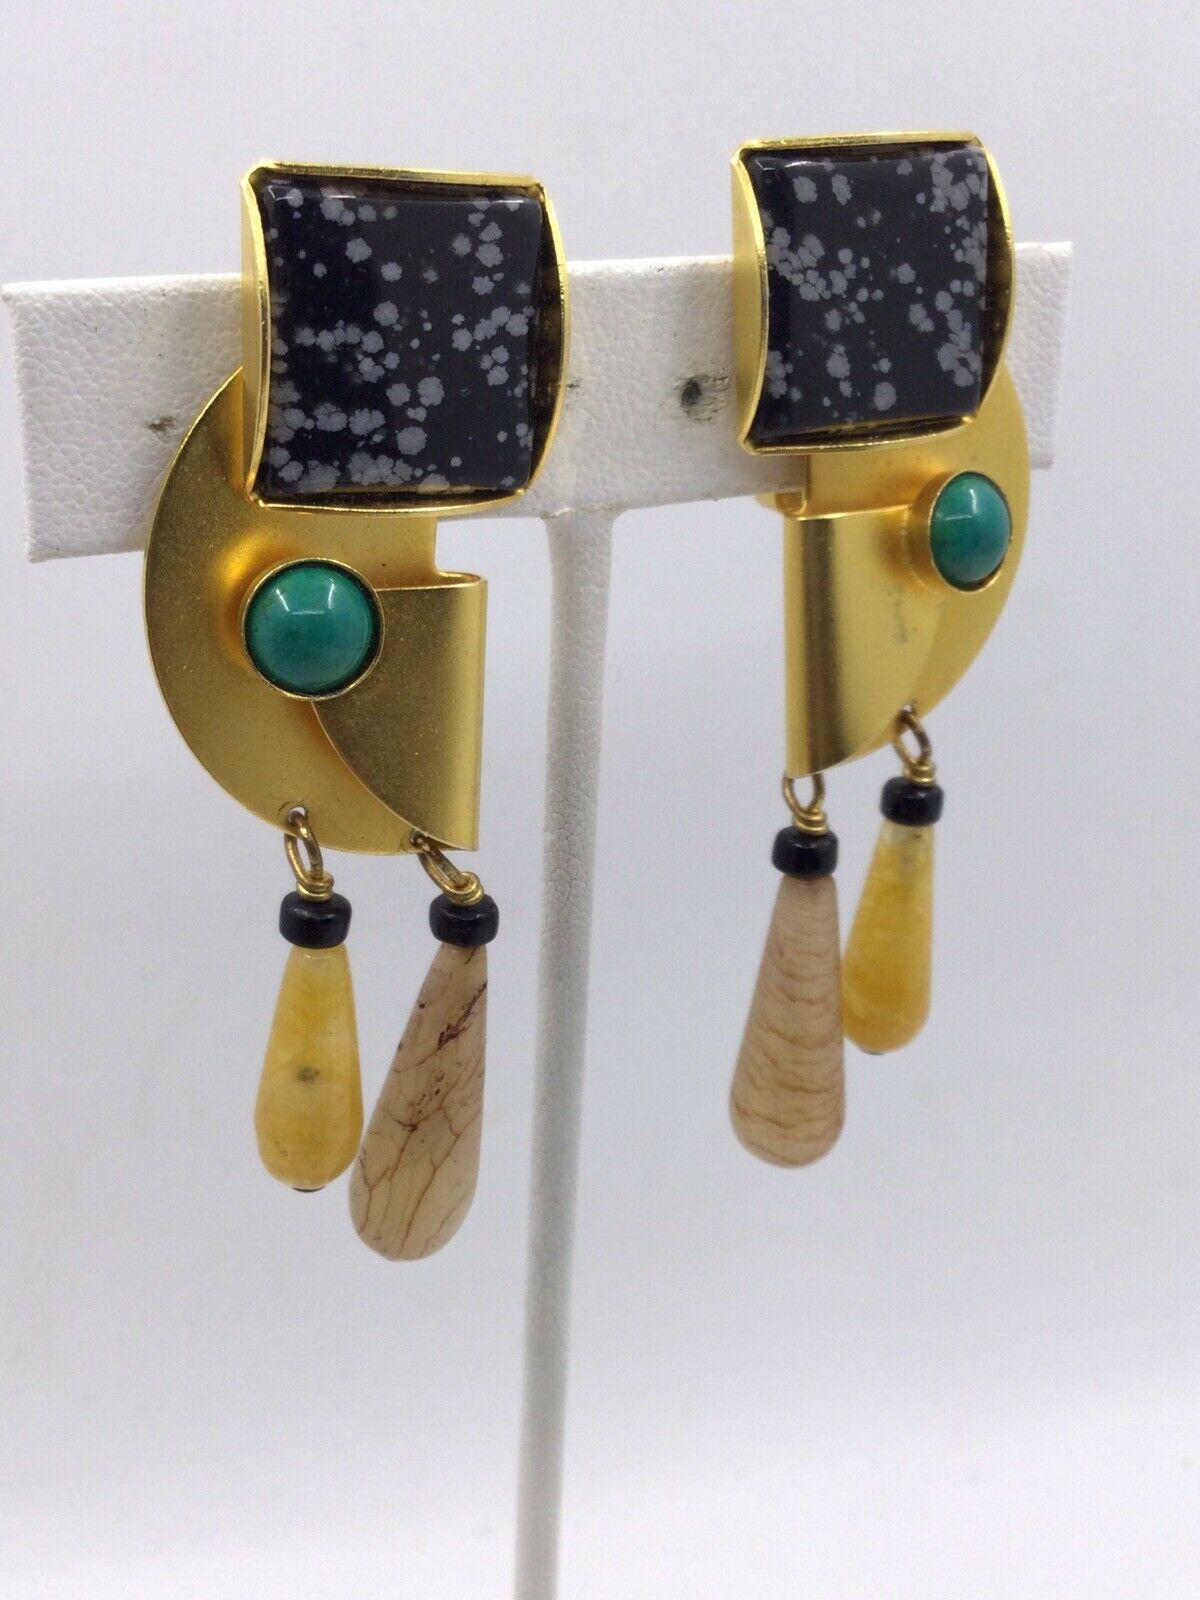 Fabulous Signed Gale Rothstein Designer Modernist Long Multi-Gem Dangle Earrings. 18K Gold plate over brass. Measuring approx. 2 1/2” long X 7/8” wide. Striking Abstract design. Signed on the back: GALE ROTHSTEIN II. Circa: 1980s. More Beautiful in